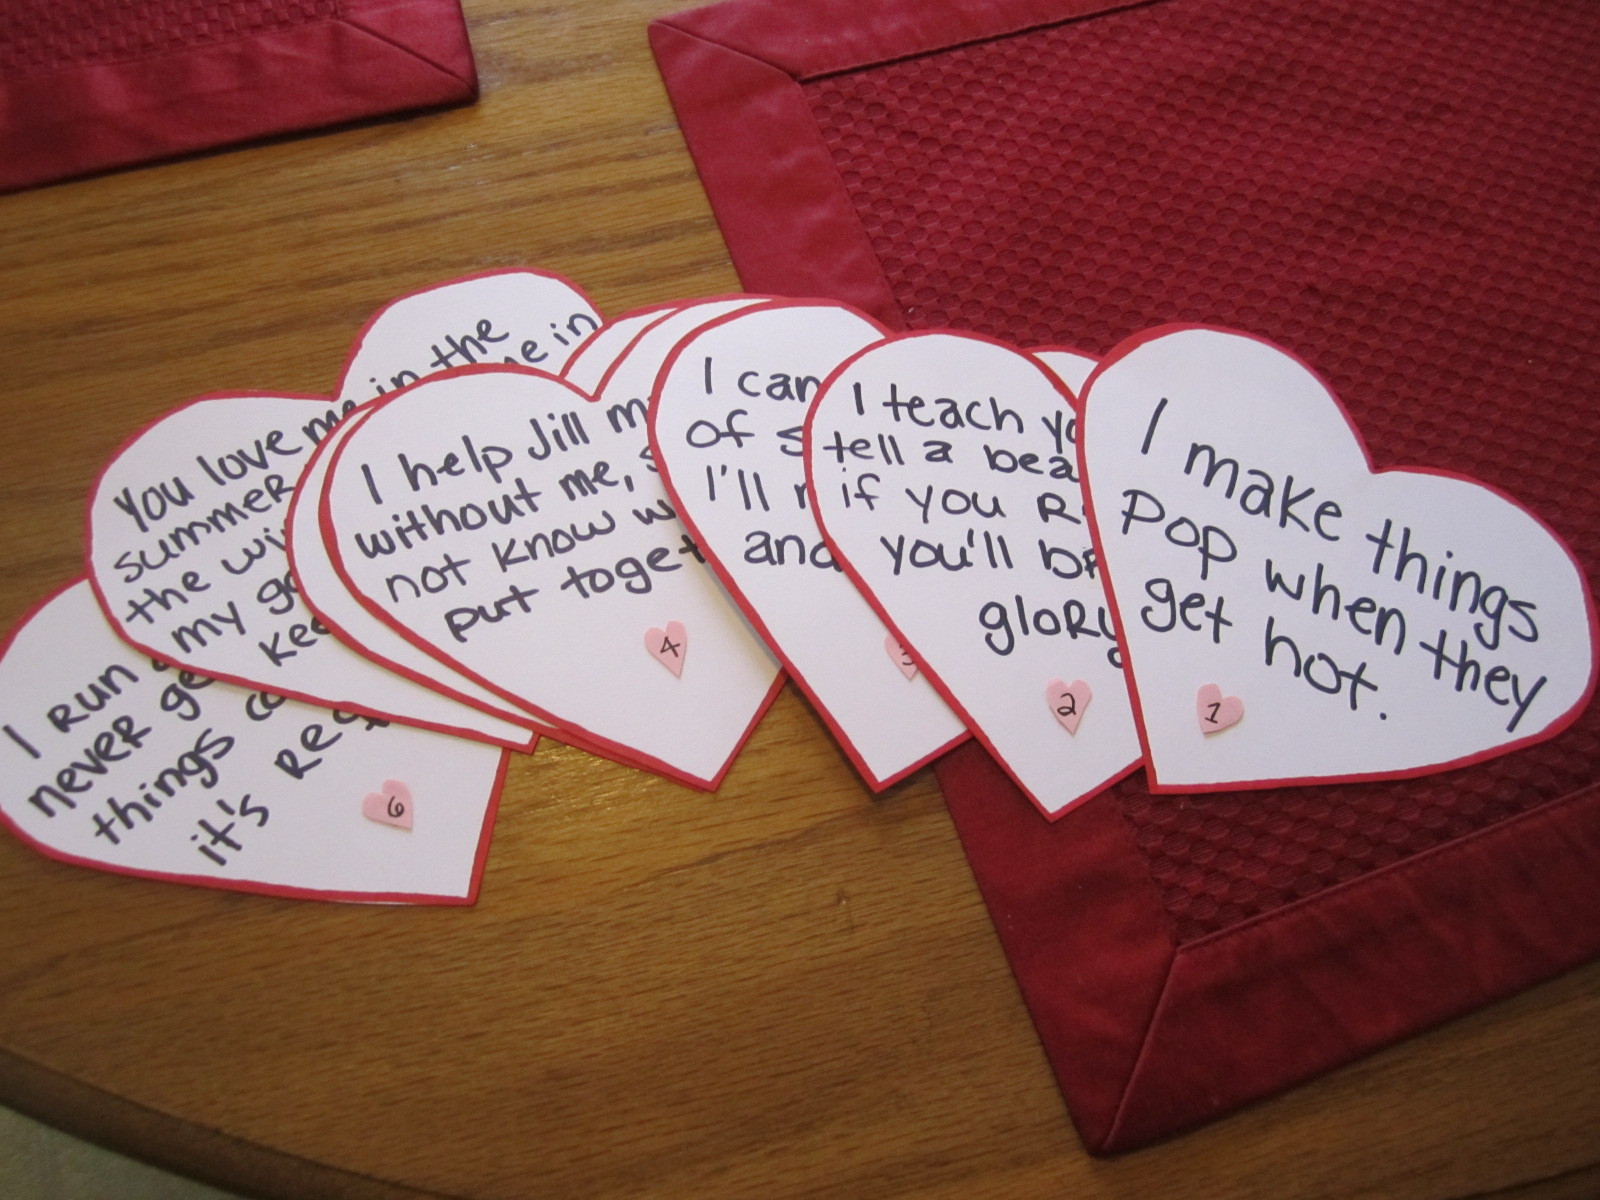 Valentines Guy Gift Ideas
 Ten DIY Valentine’s Day Gifts for him and her